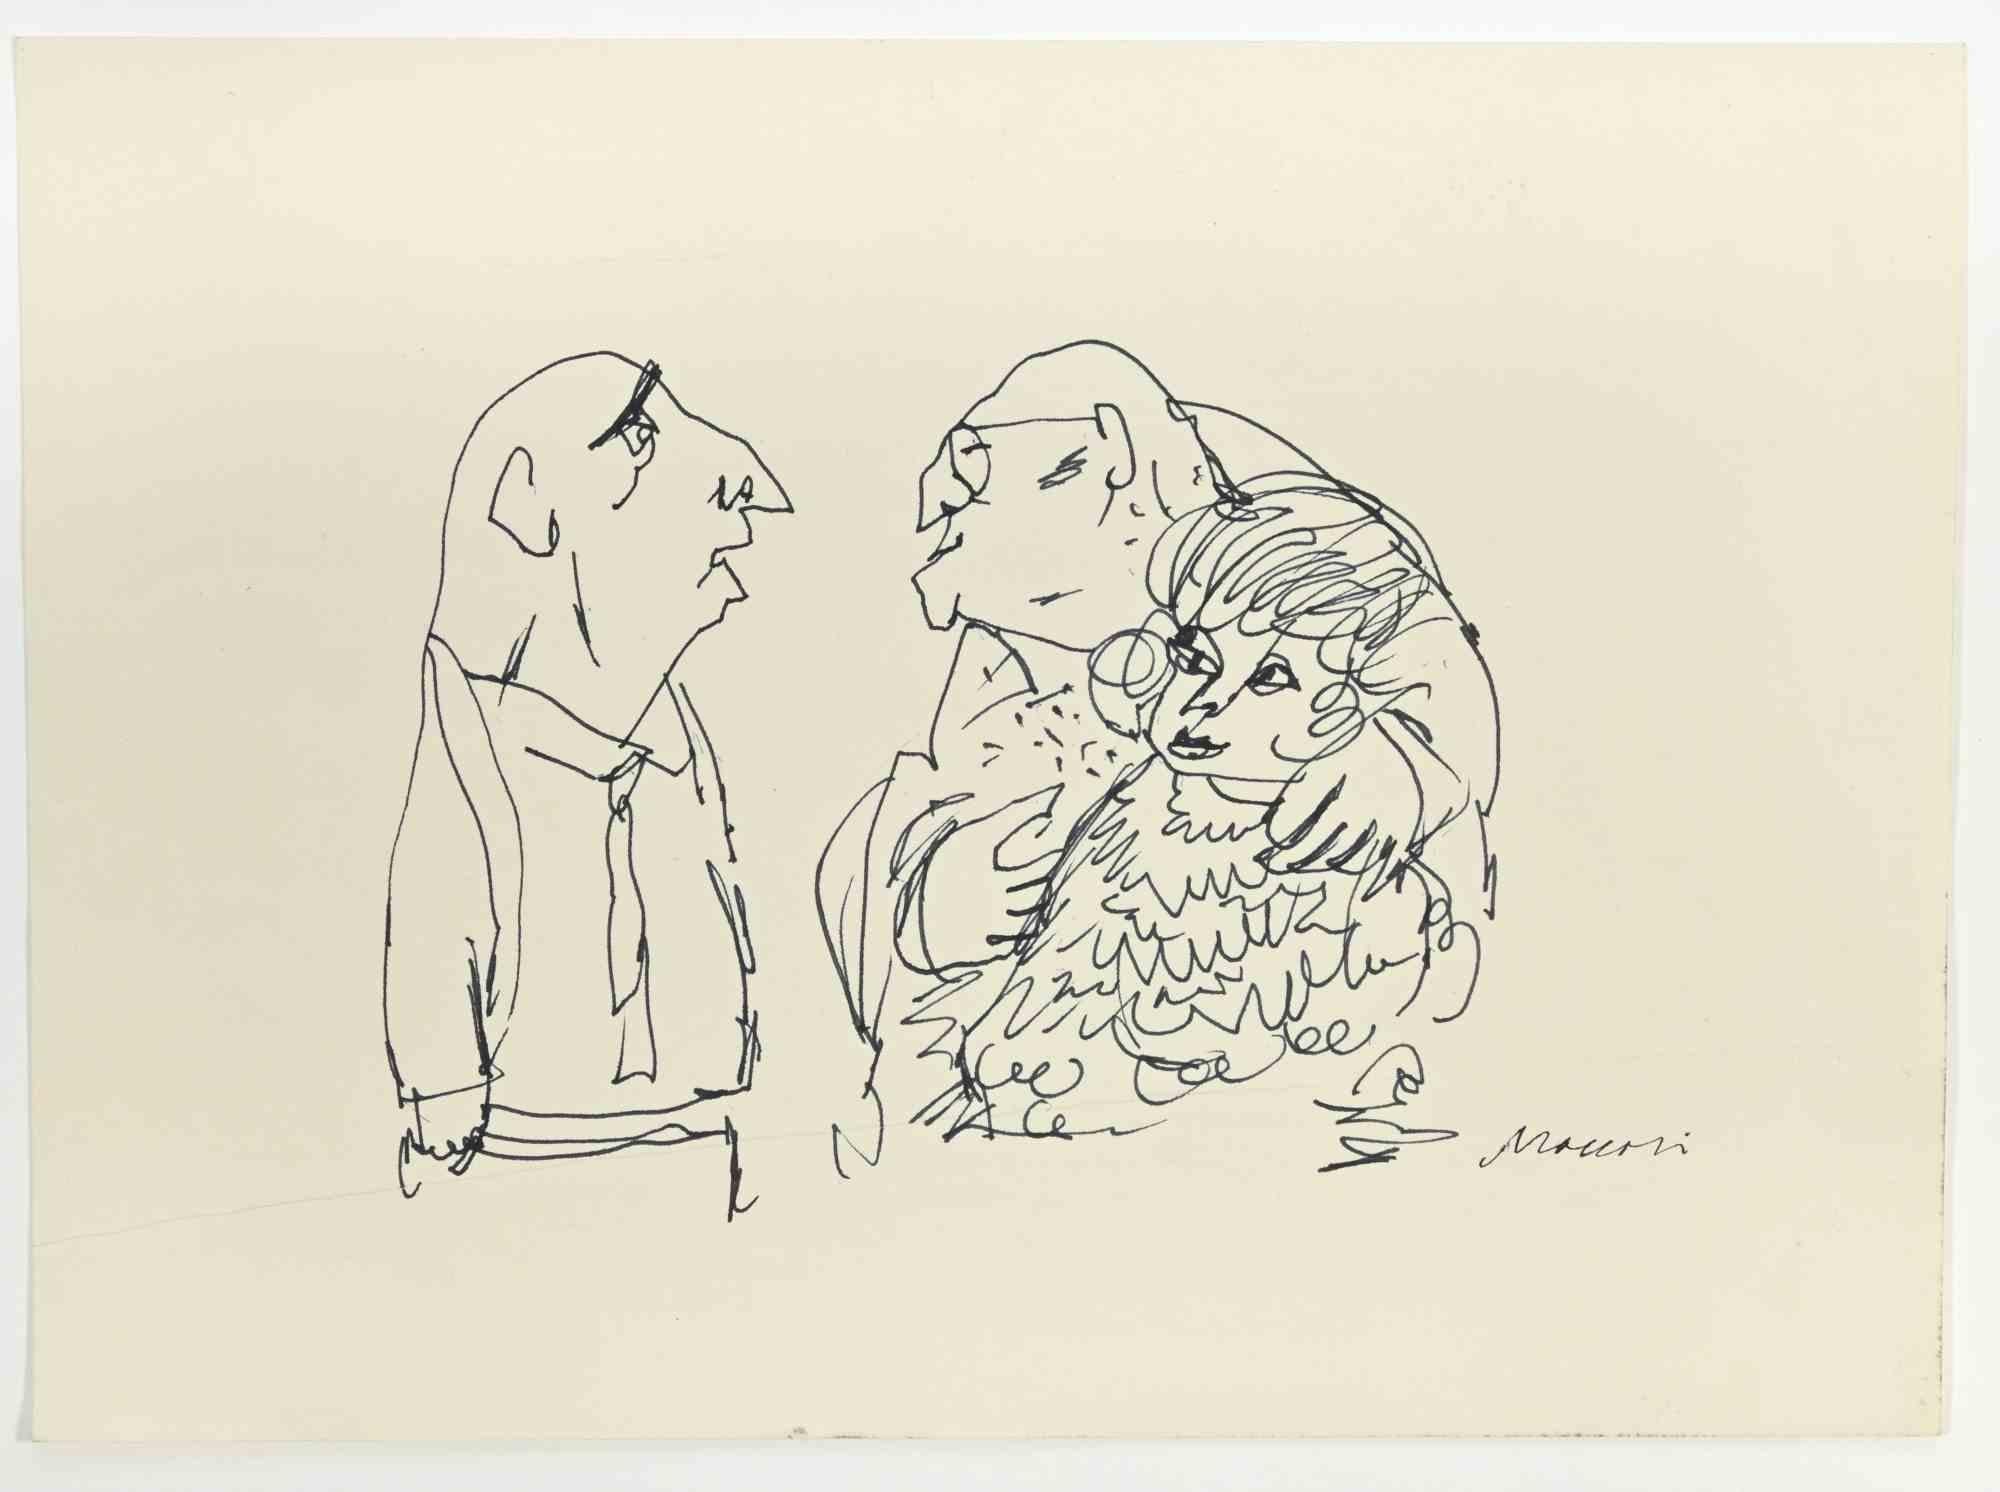 Figures is a china ink Drawing realized by Mino Maccari  (1924-1989) in the 1960s.

Hand-signed on the lower.

Good conditions with slight folding.

Mino Maccari (Siena, 1924-Rome, June 16, 1989) was an Italian writer, painter, engraver and